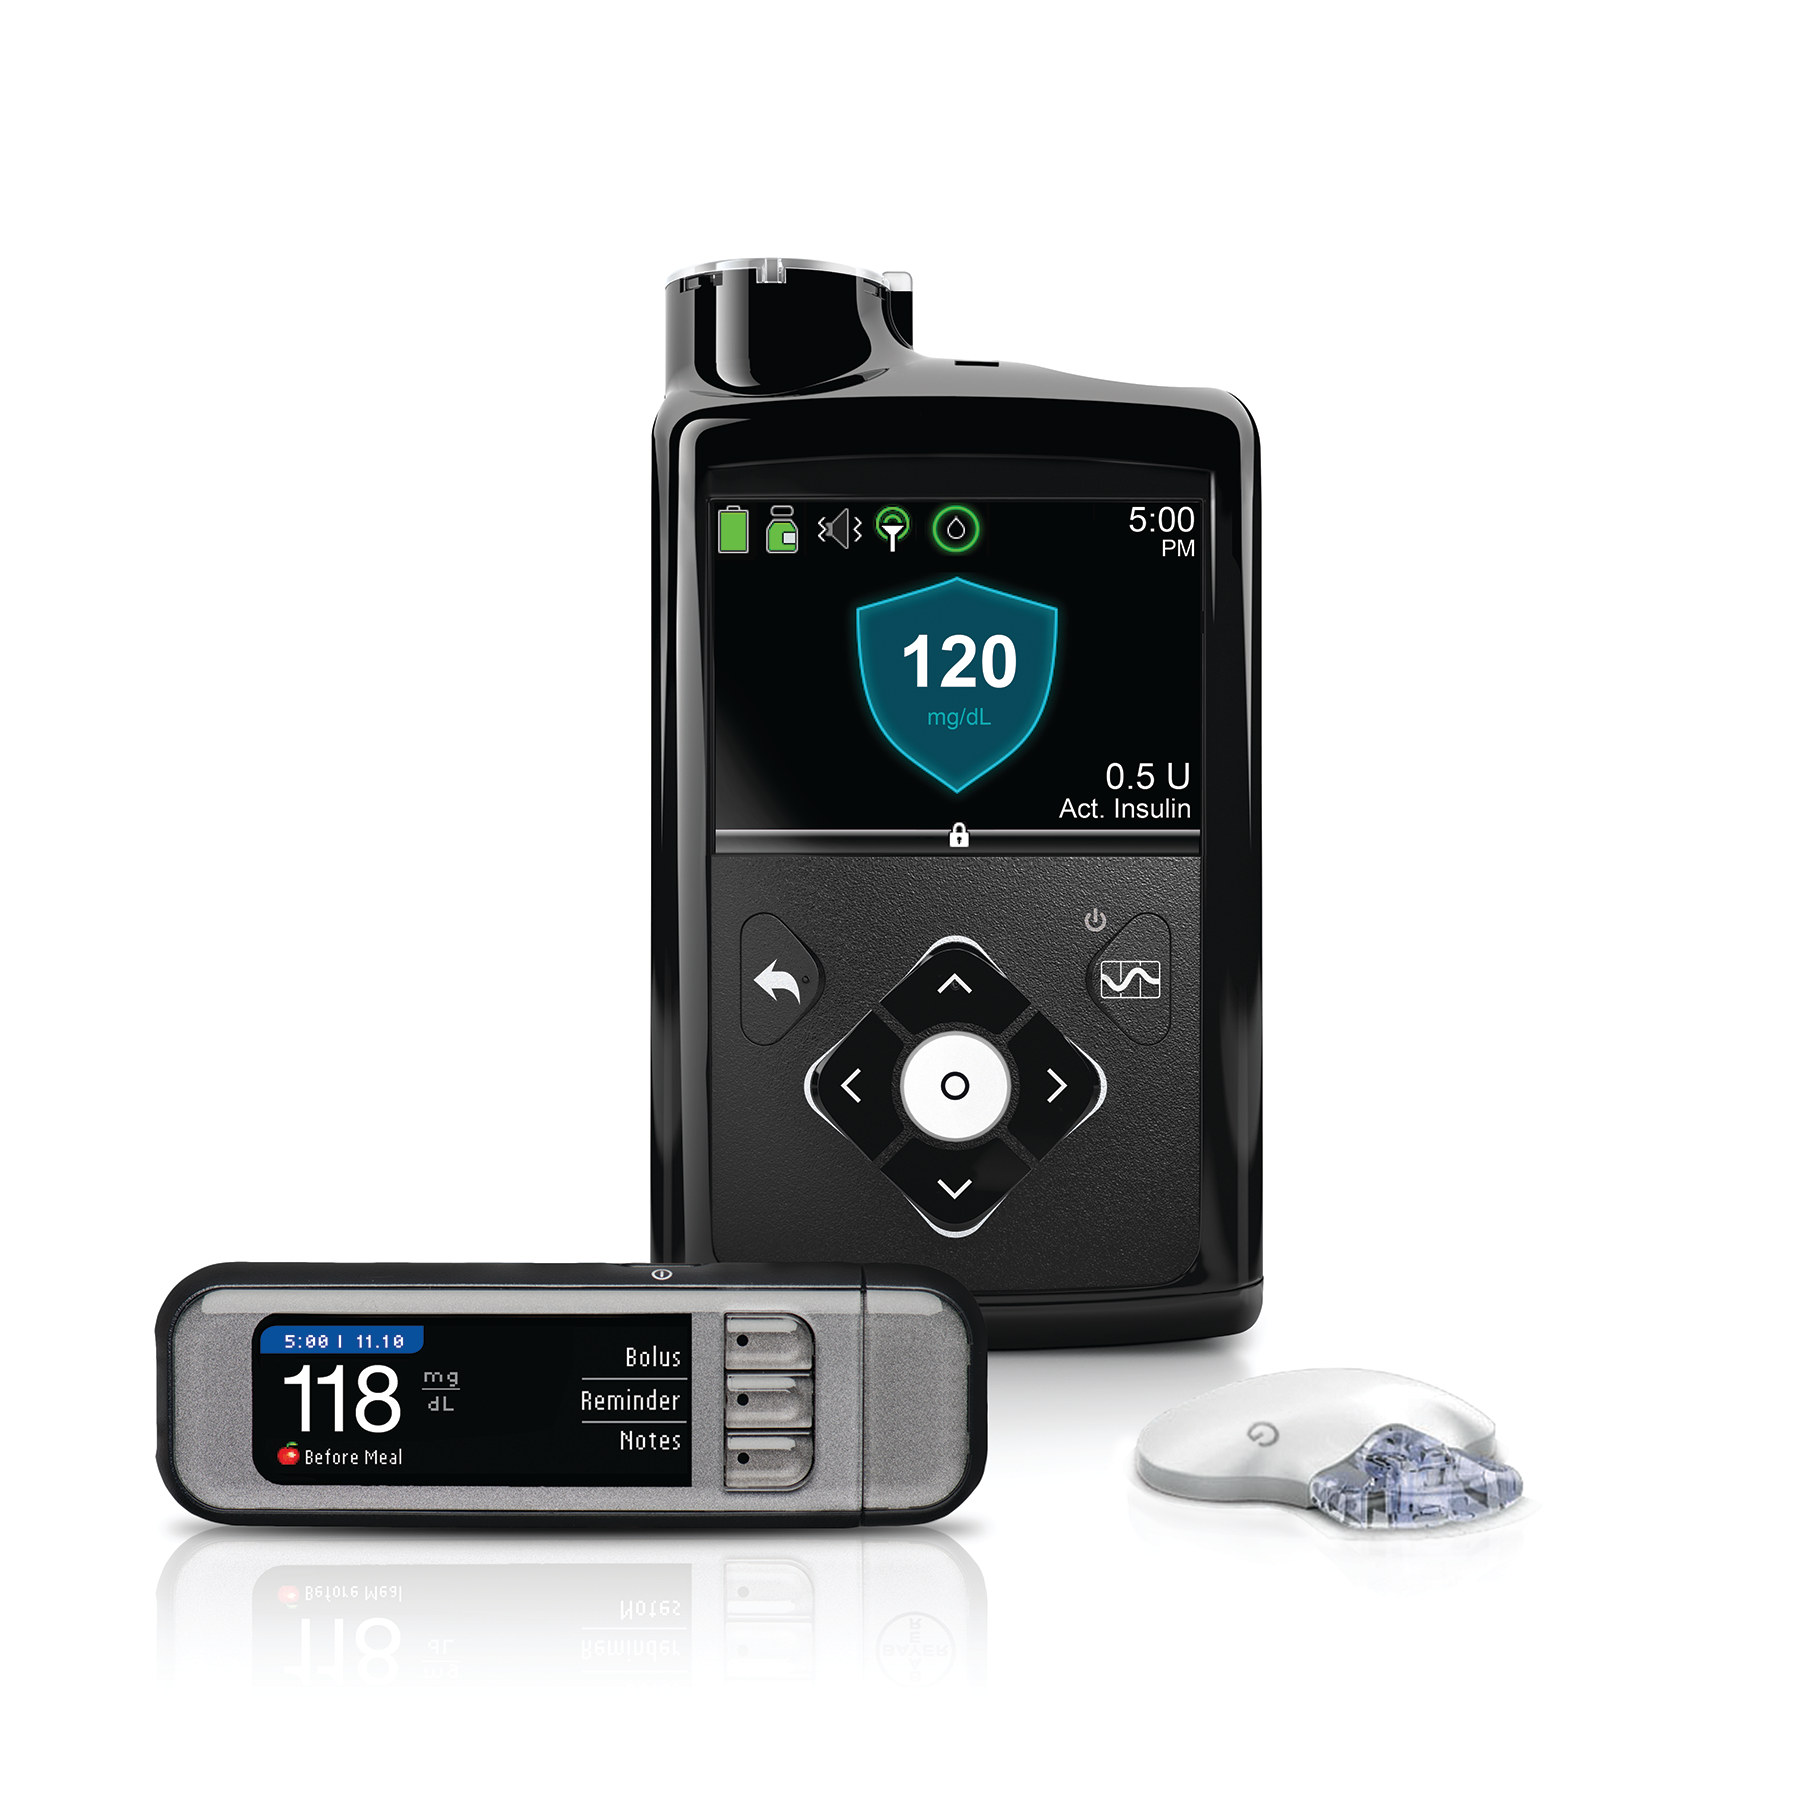 Advancing technology in diabetes management